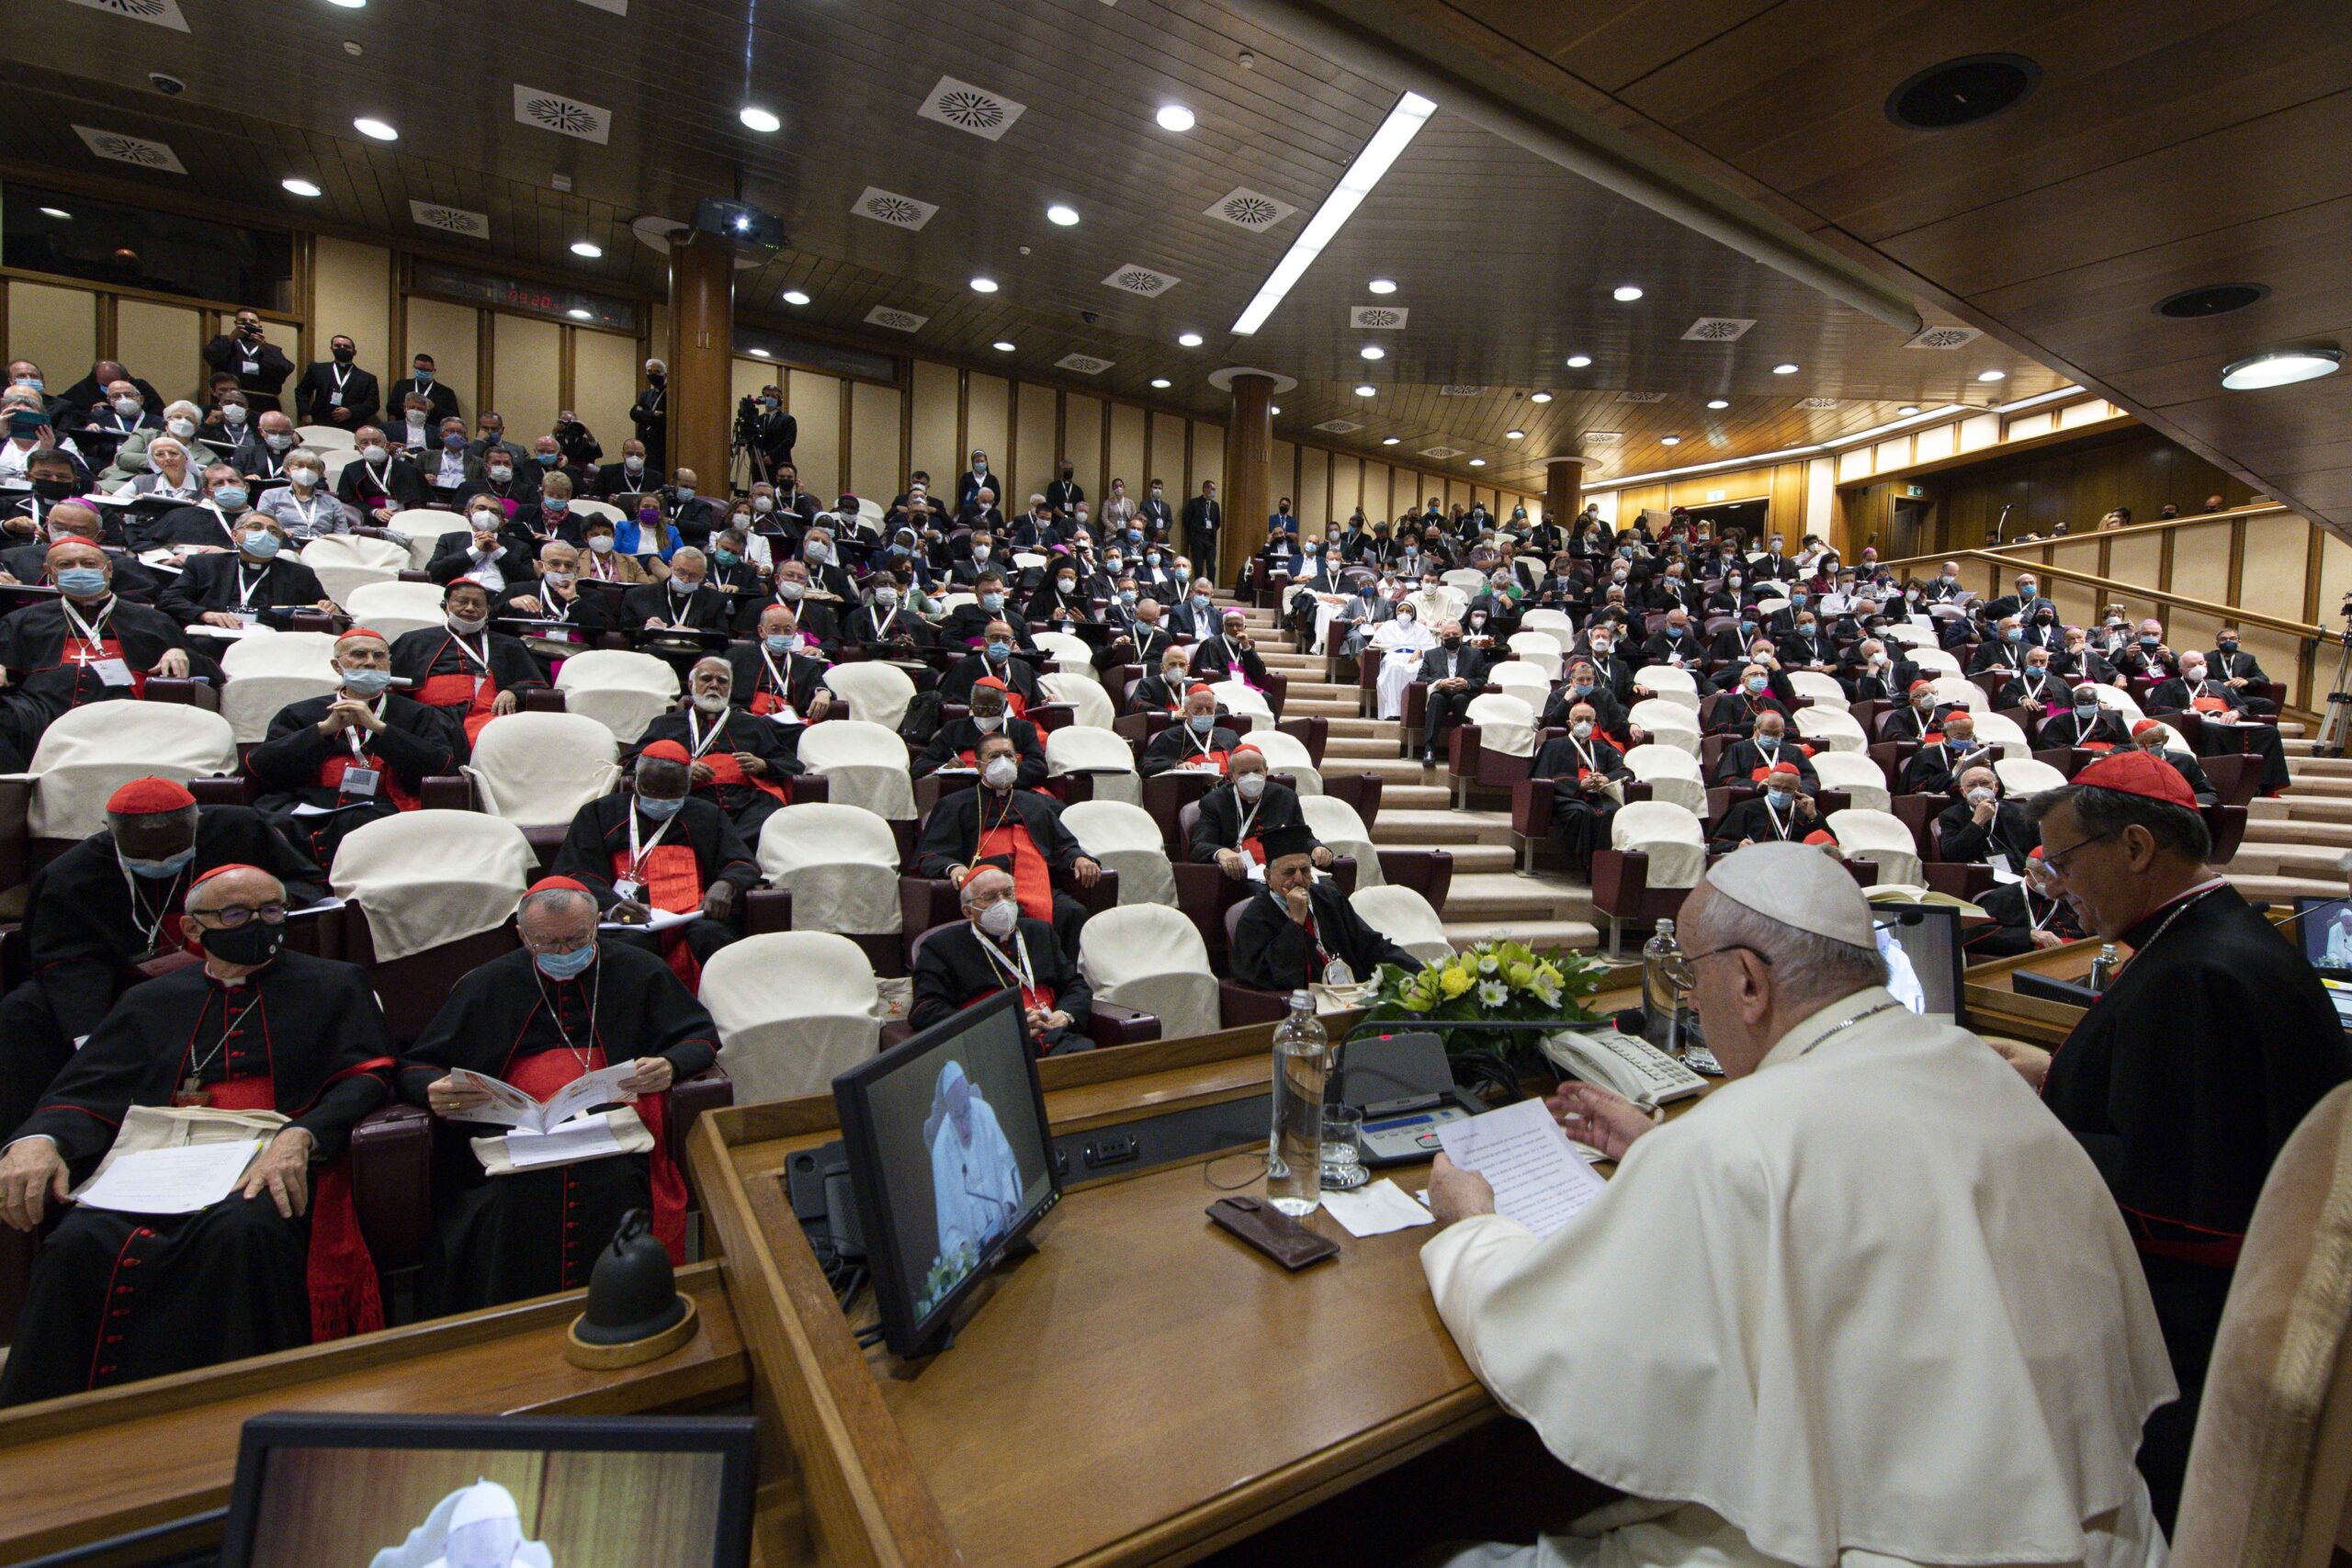 Featured image for “Women to Cast Historic Votes in Vatican City’s Catholic Church Assembly for the First Time”